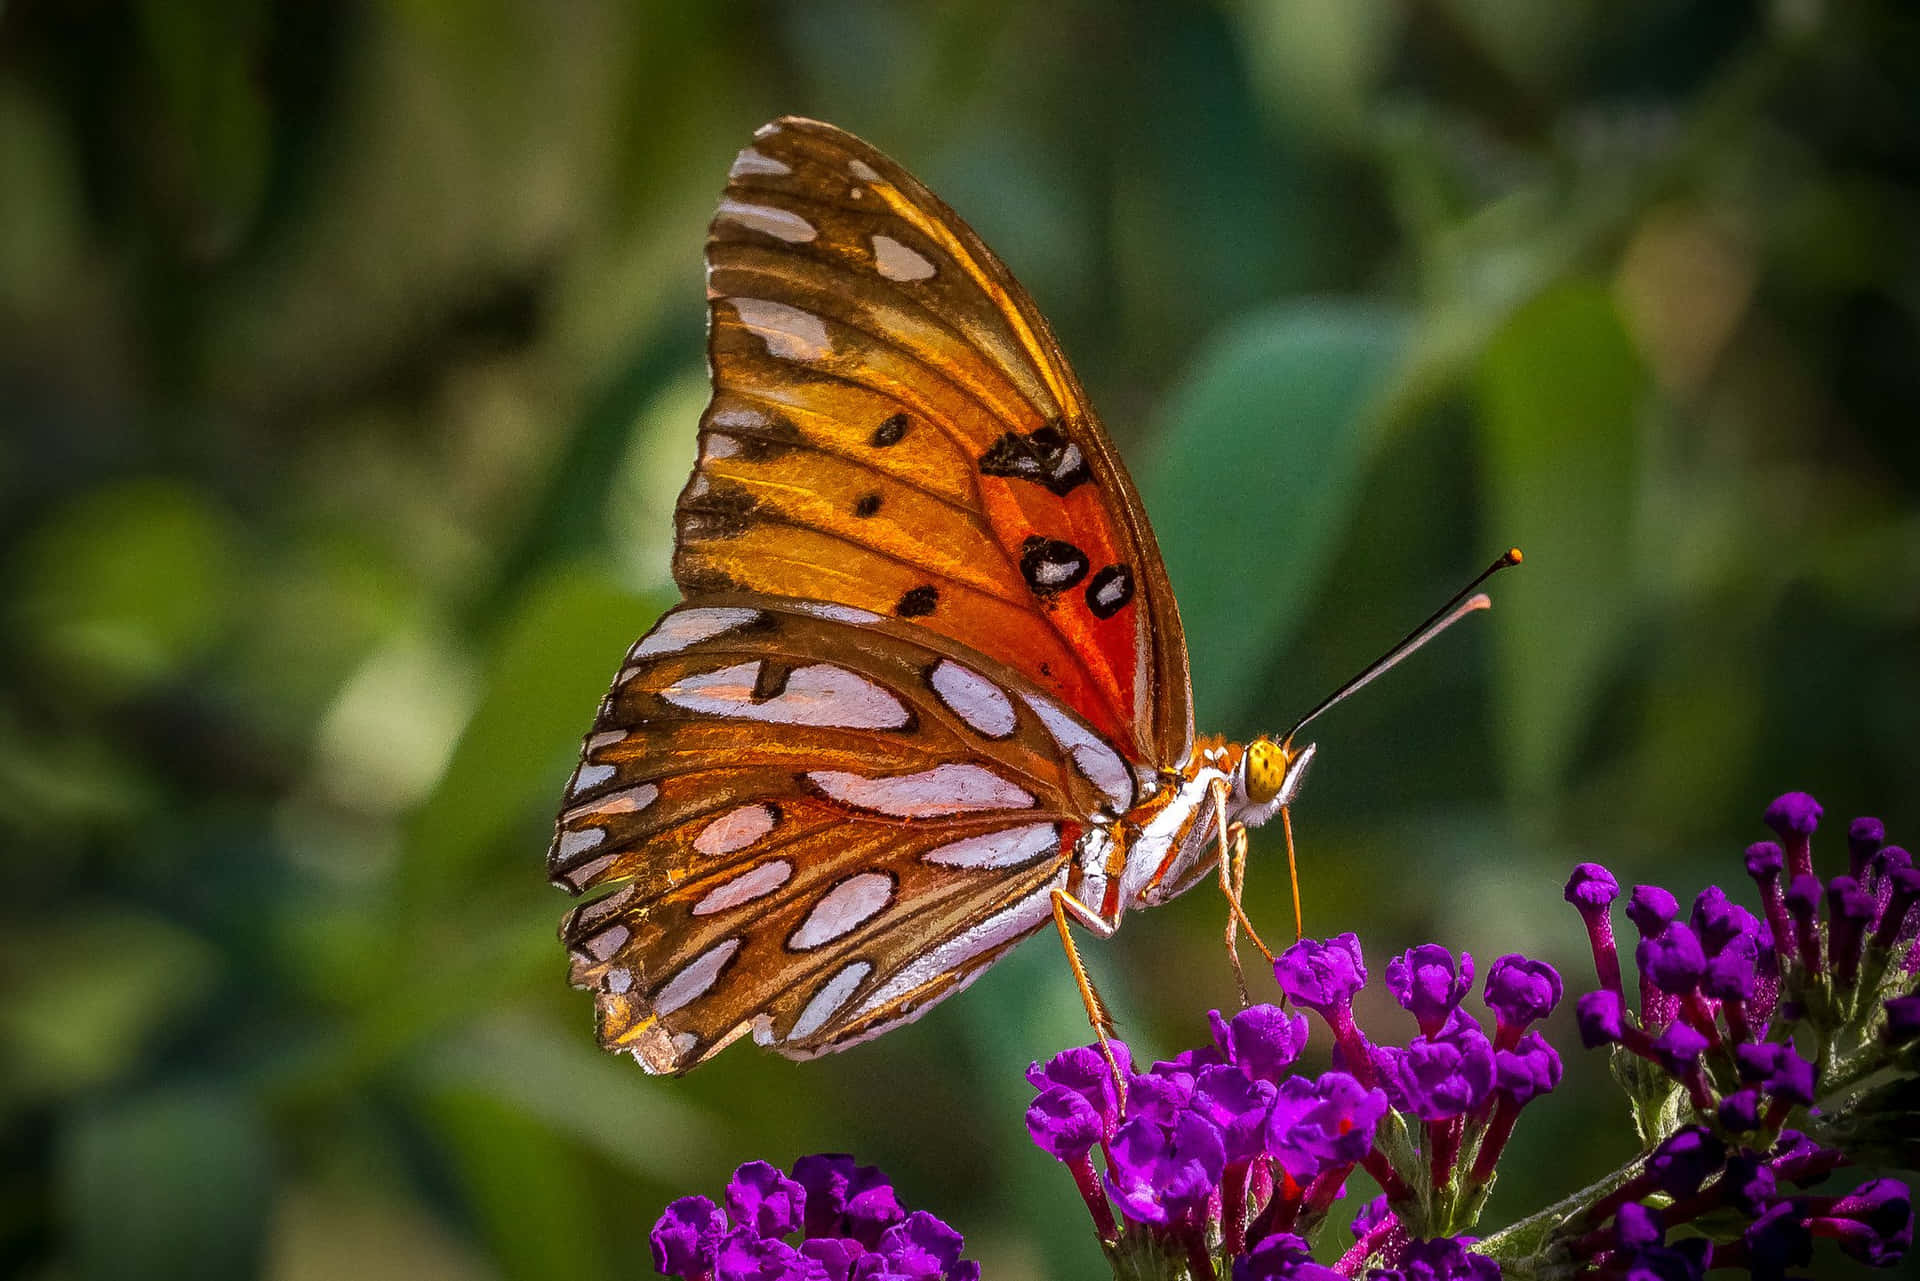 "A beautiful azure-winged butterfly perched on a flowering bush"